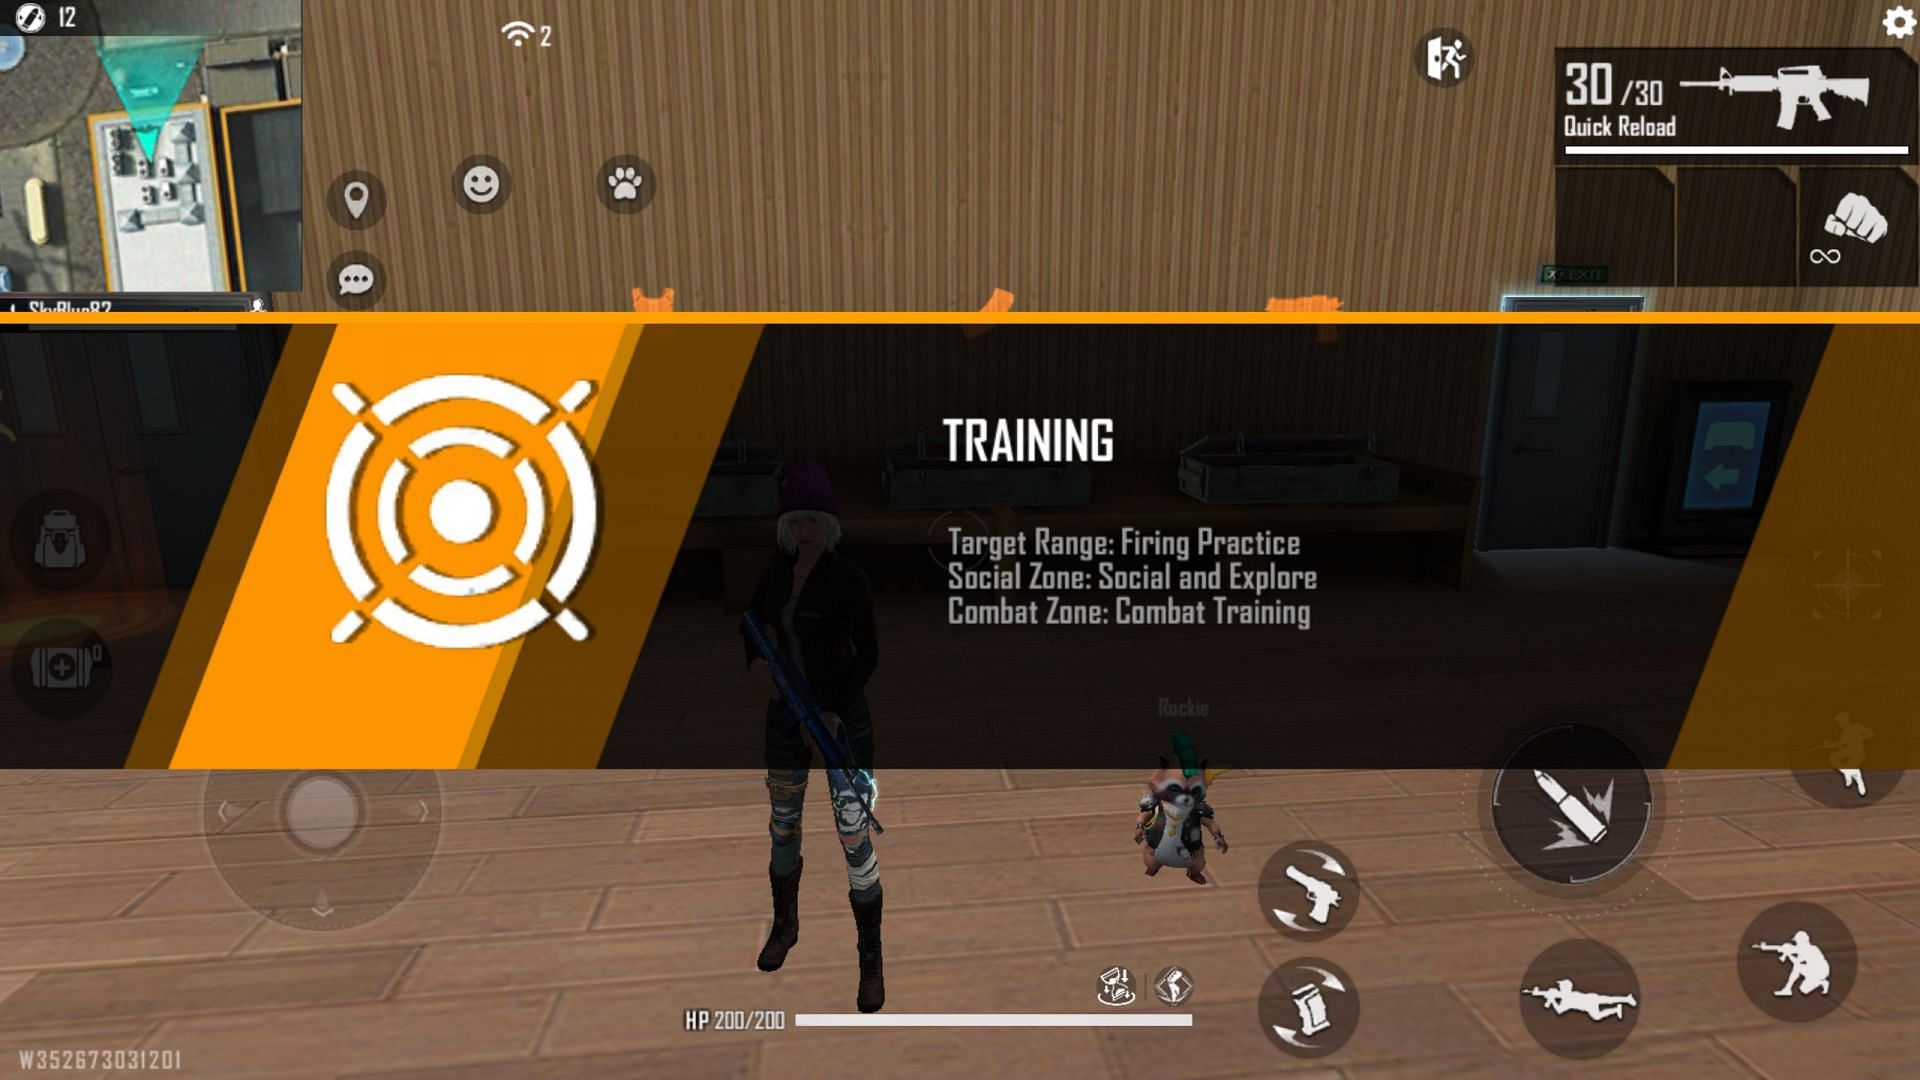 Users can practice their aim within the training range of the game